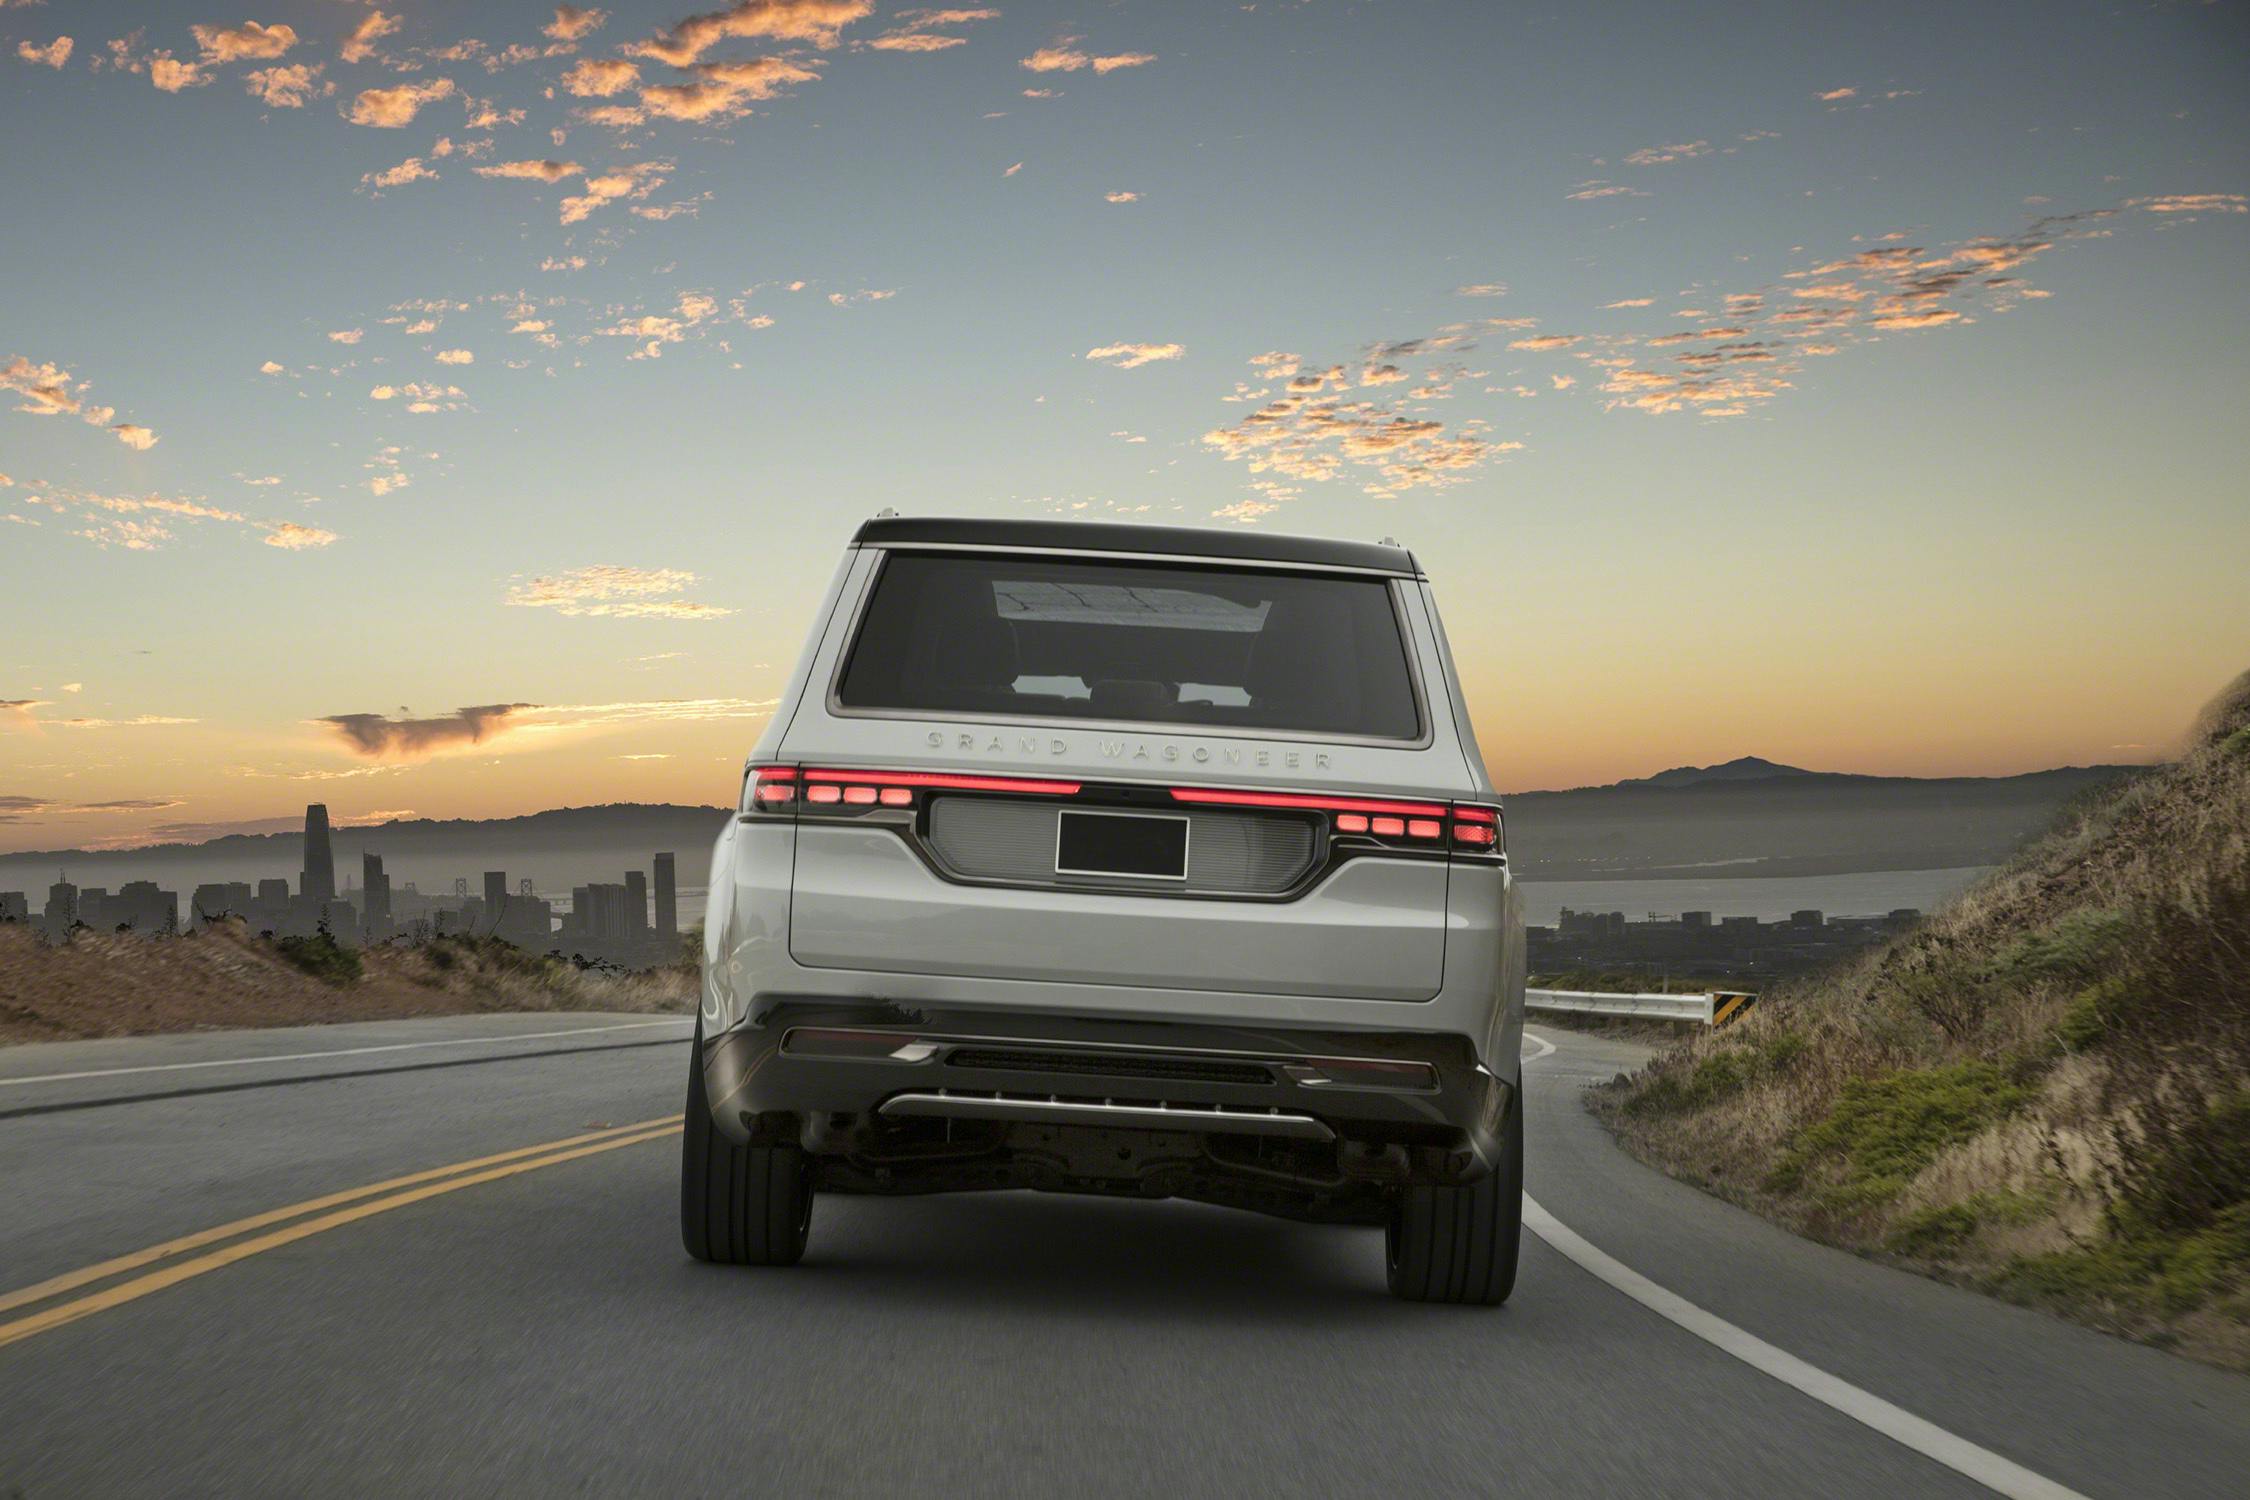 Grand Wagoneer Concept rear view on road